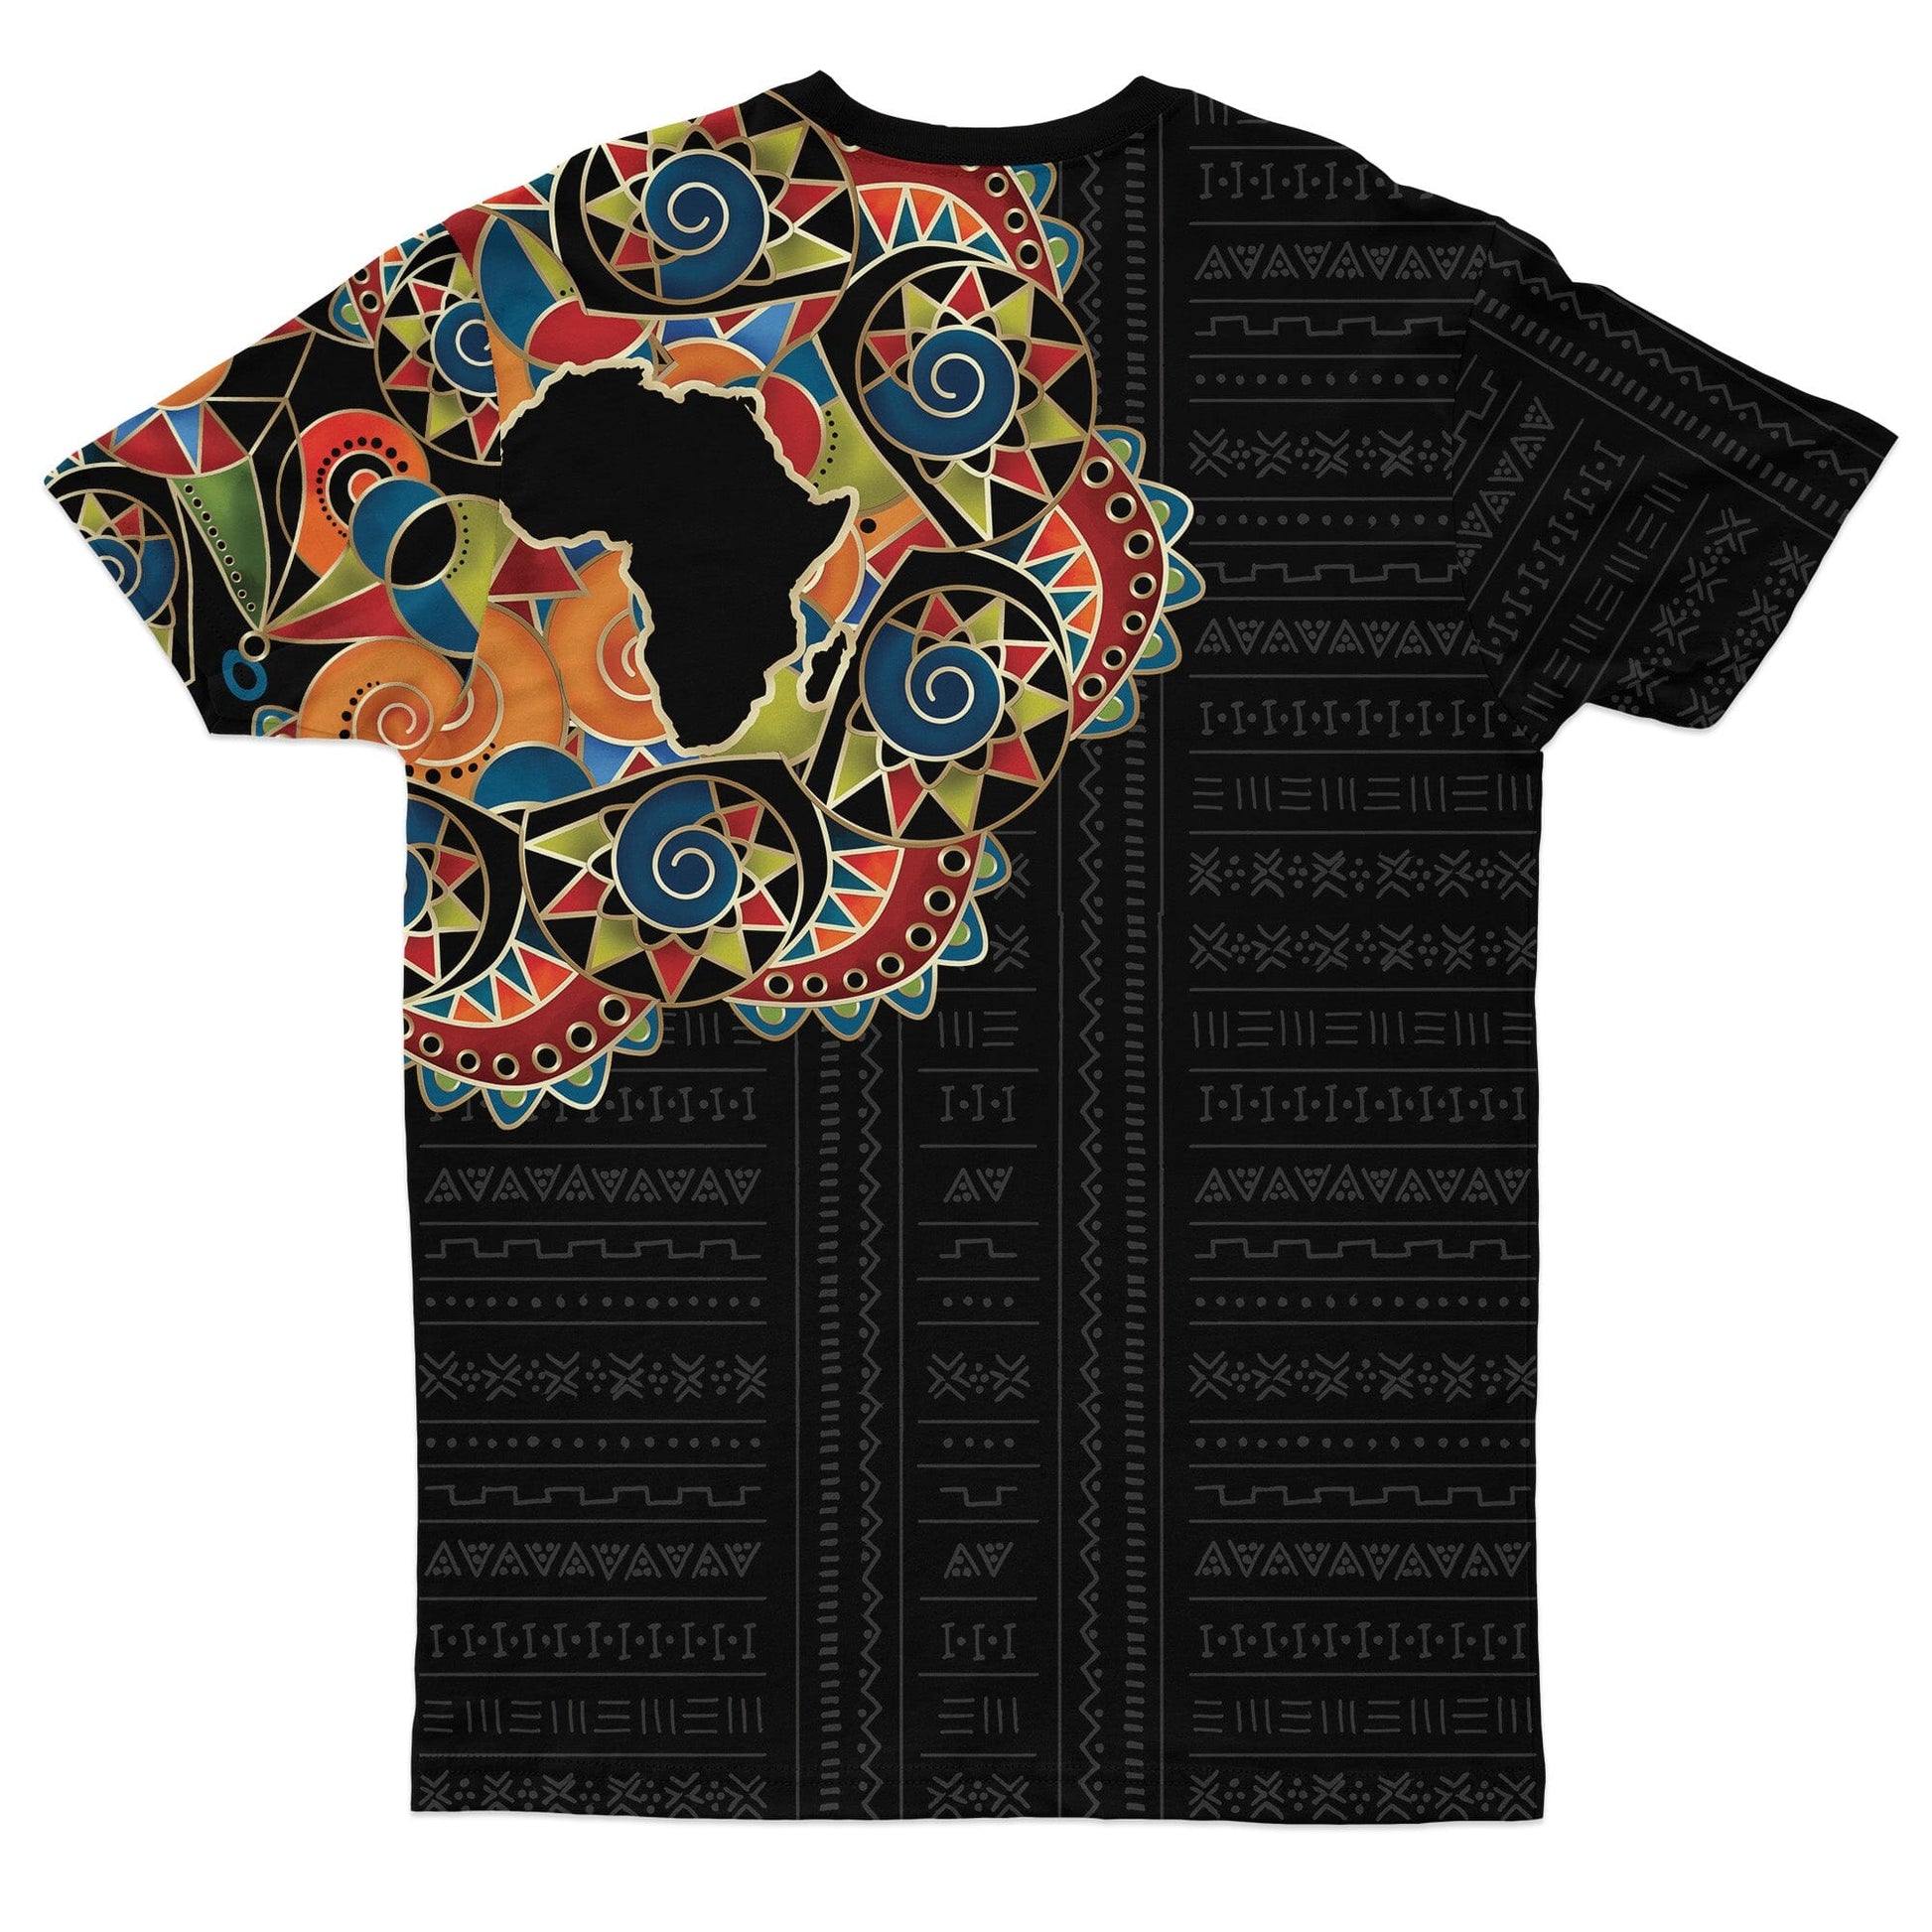 Multi-Colored Sleeve African Pattern Print T-shirt And Shorts Set Tee Shorts Set Tianci 